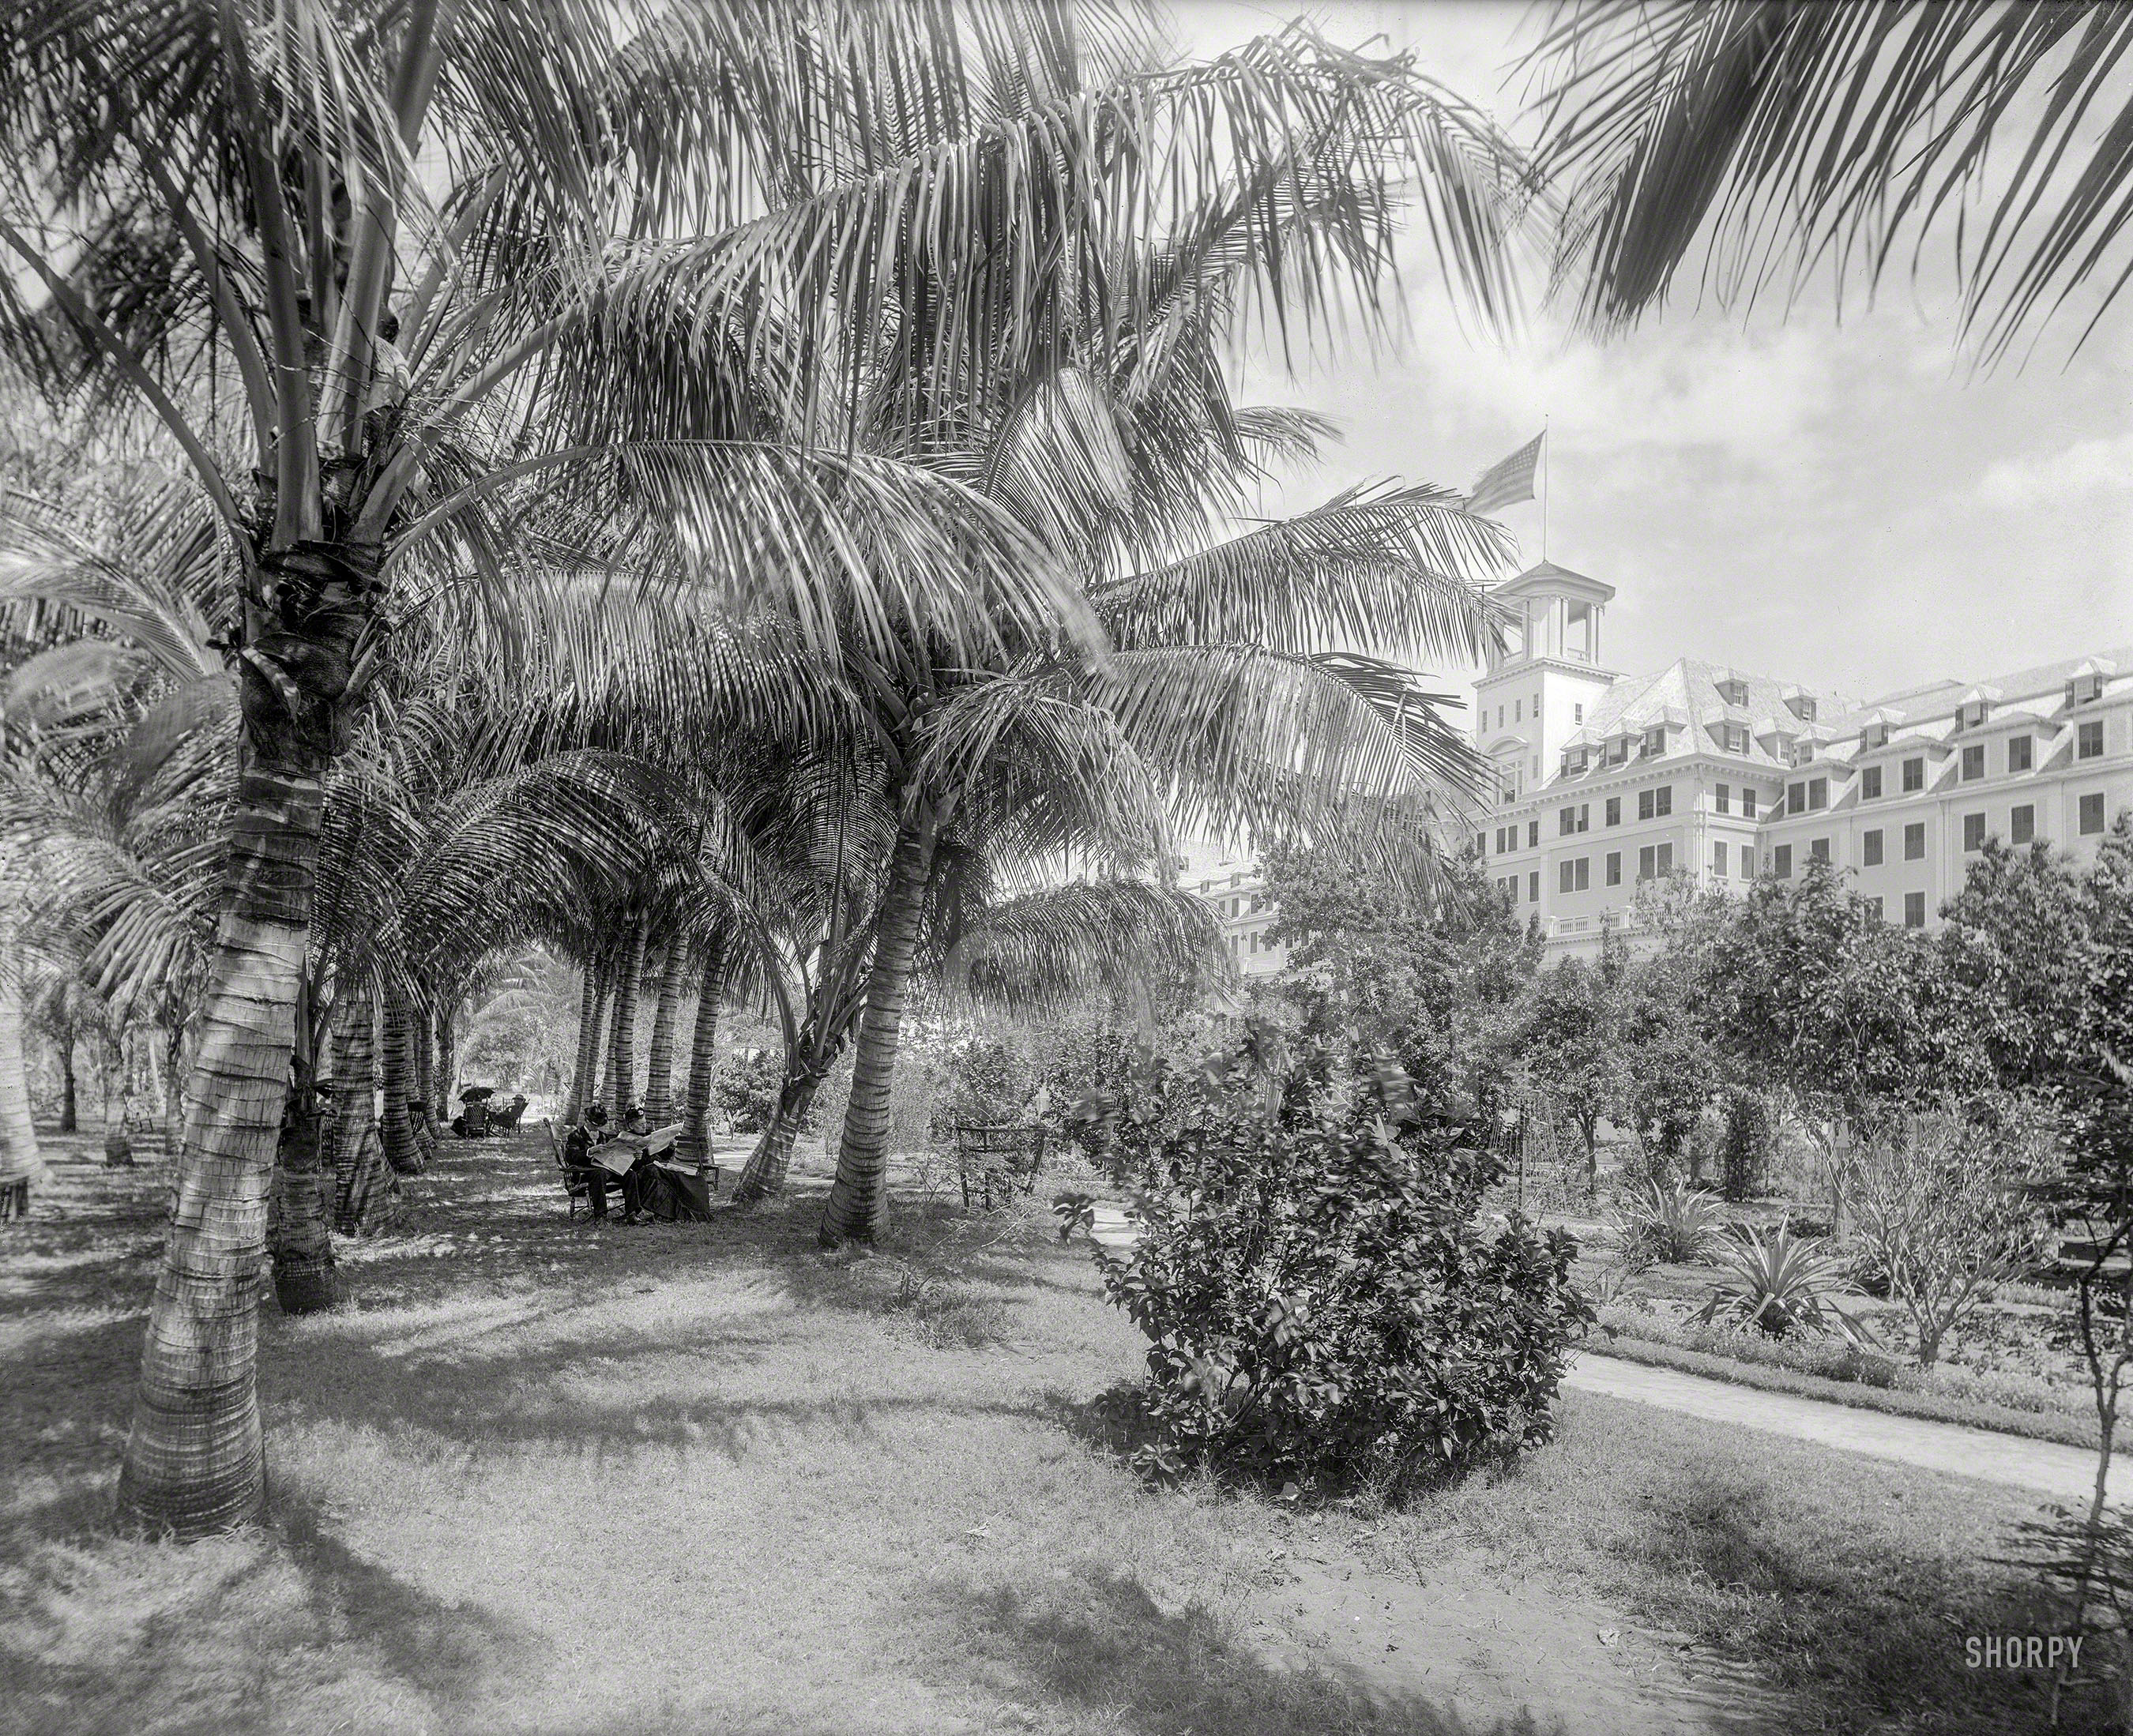 Palm Beach, Fla., circa 1894. "Hotel Royal Poinciana, Lake Worth." 8x10 inch glass negative by William Henry Jackson, Detroit Photographic Co. View full size.